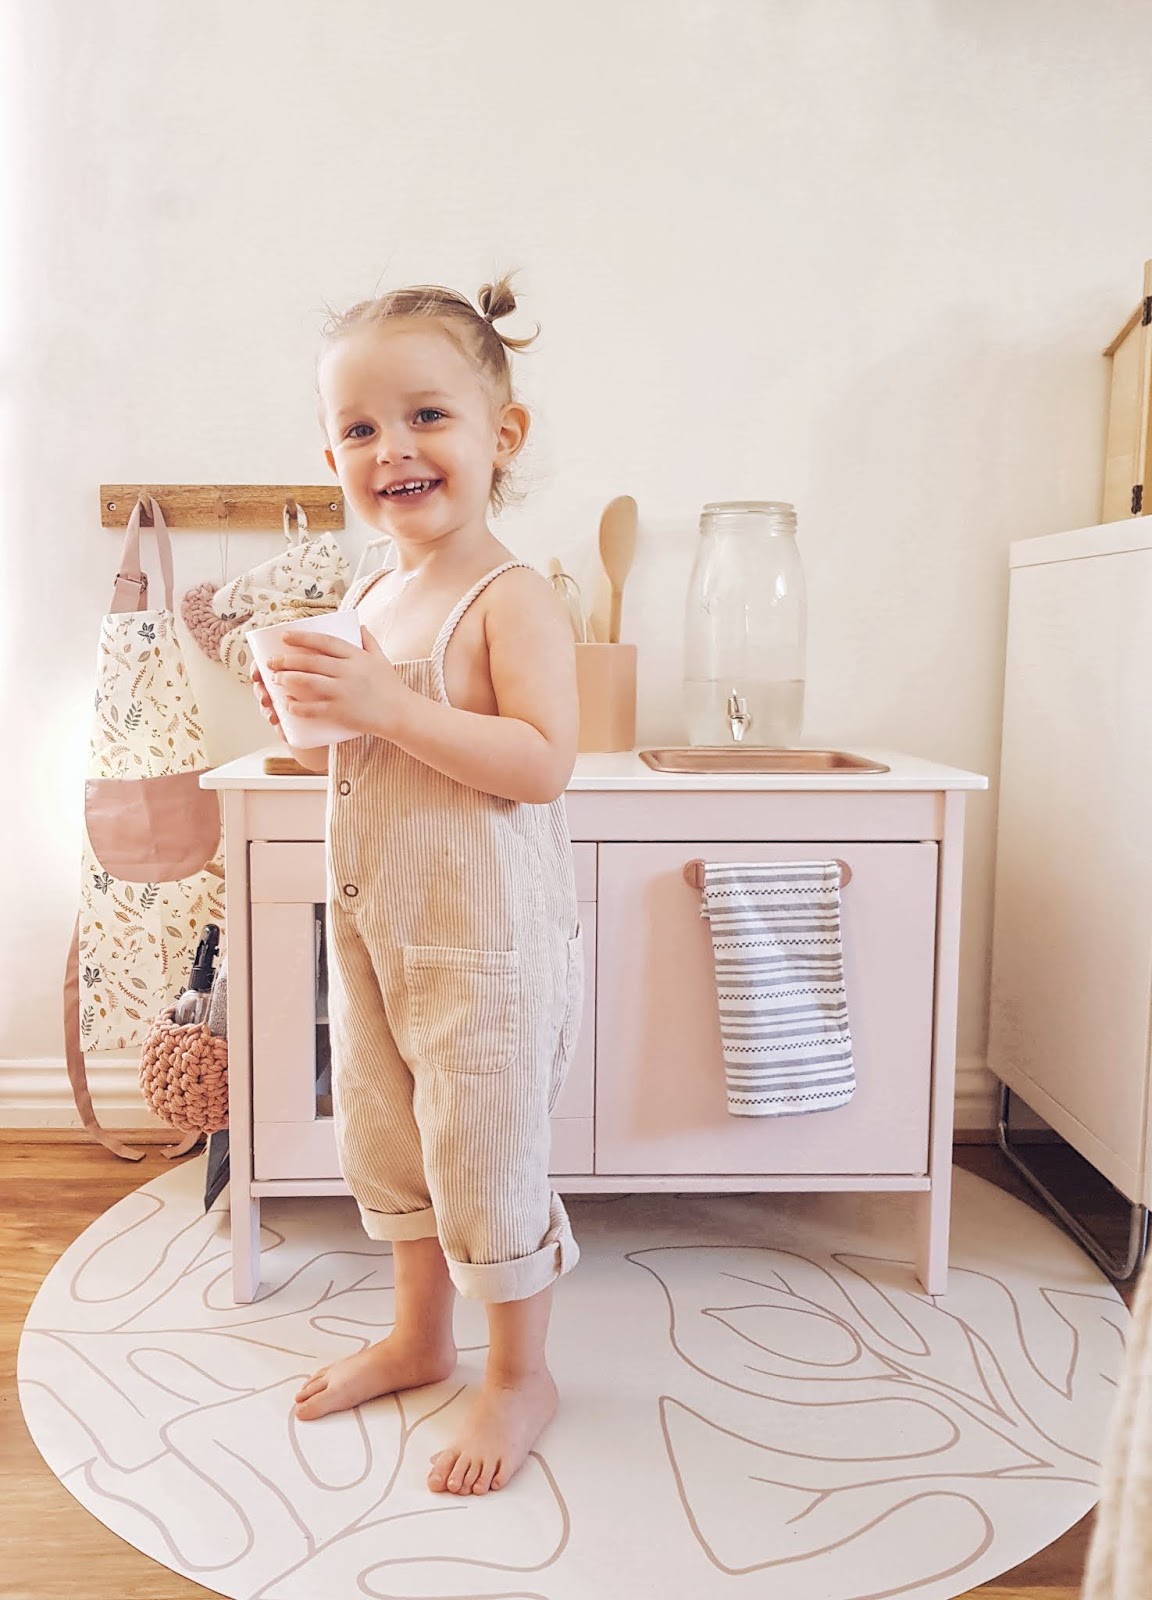 Montessori Functional Kitchen For Kids - How To Build a Toddler Kitchen